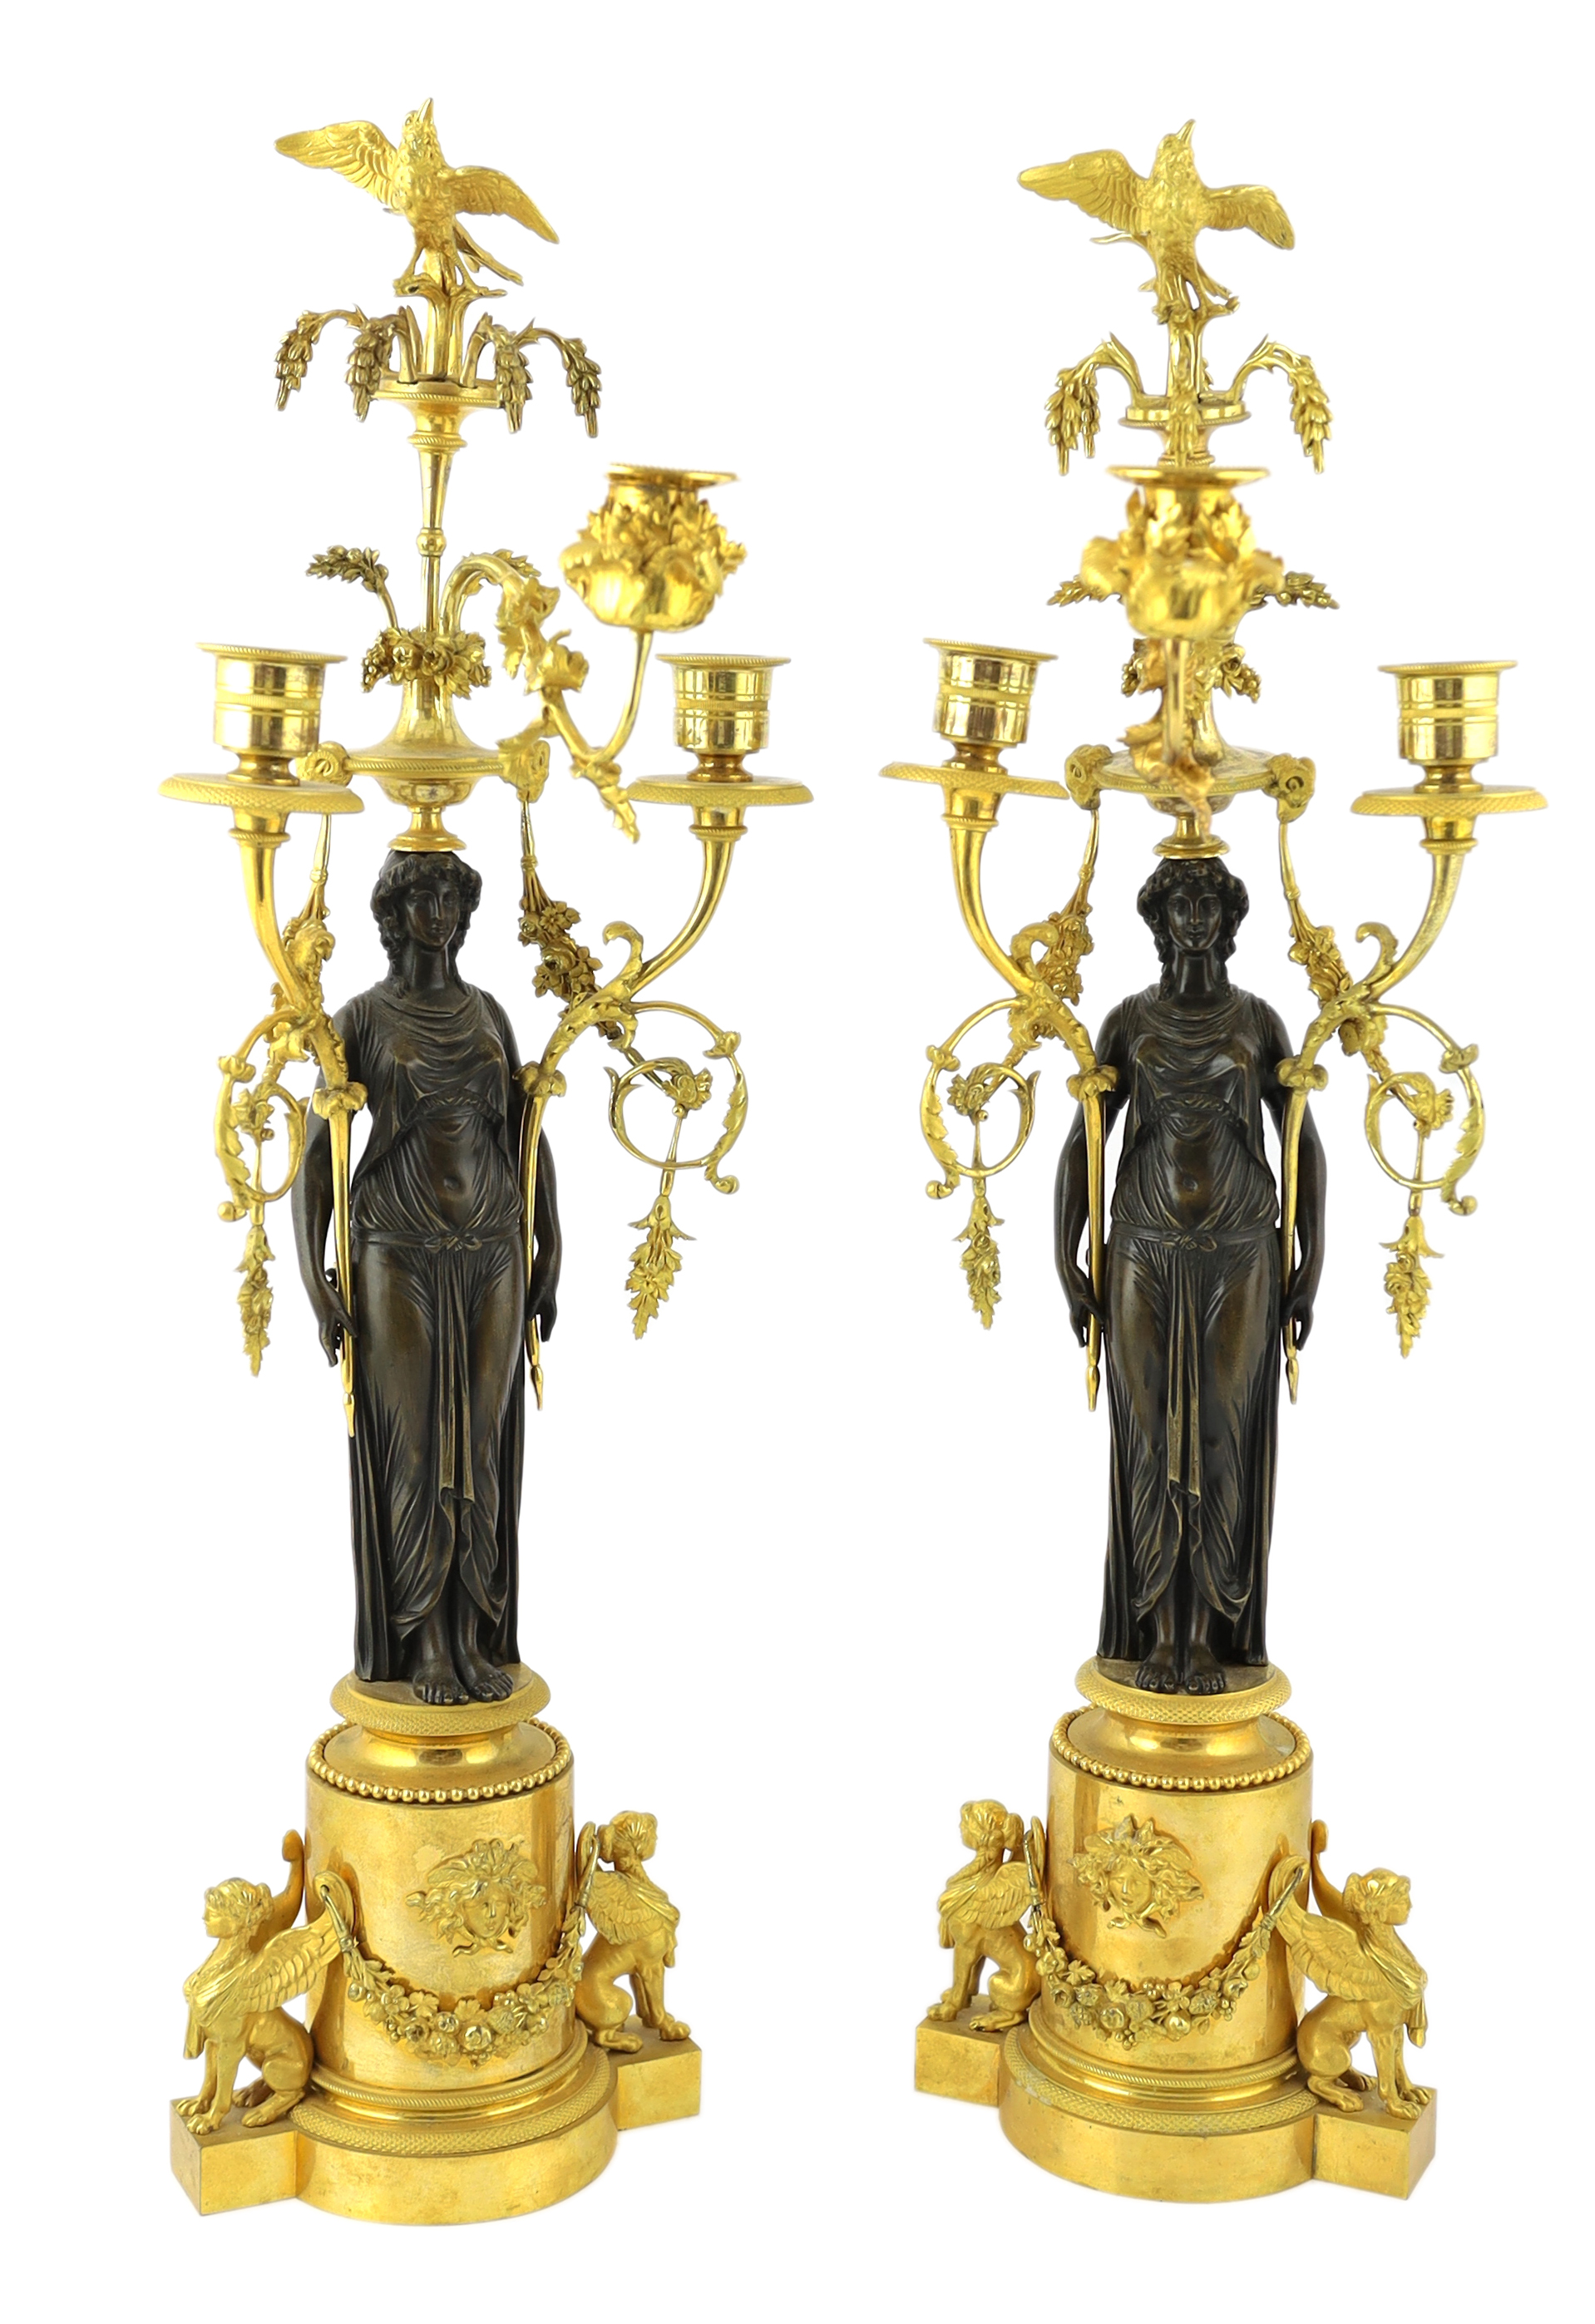 * A pair of late 19th century French Empire style bronze and ormolu three light candelabra, with